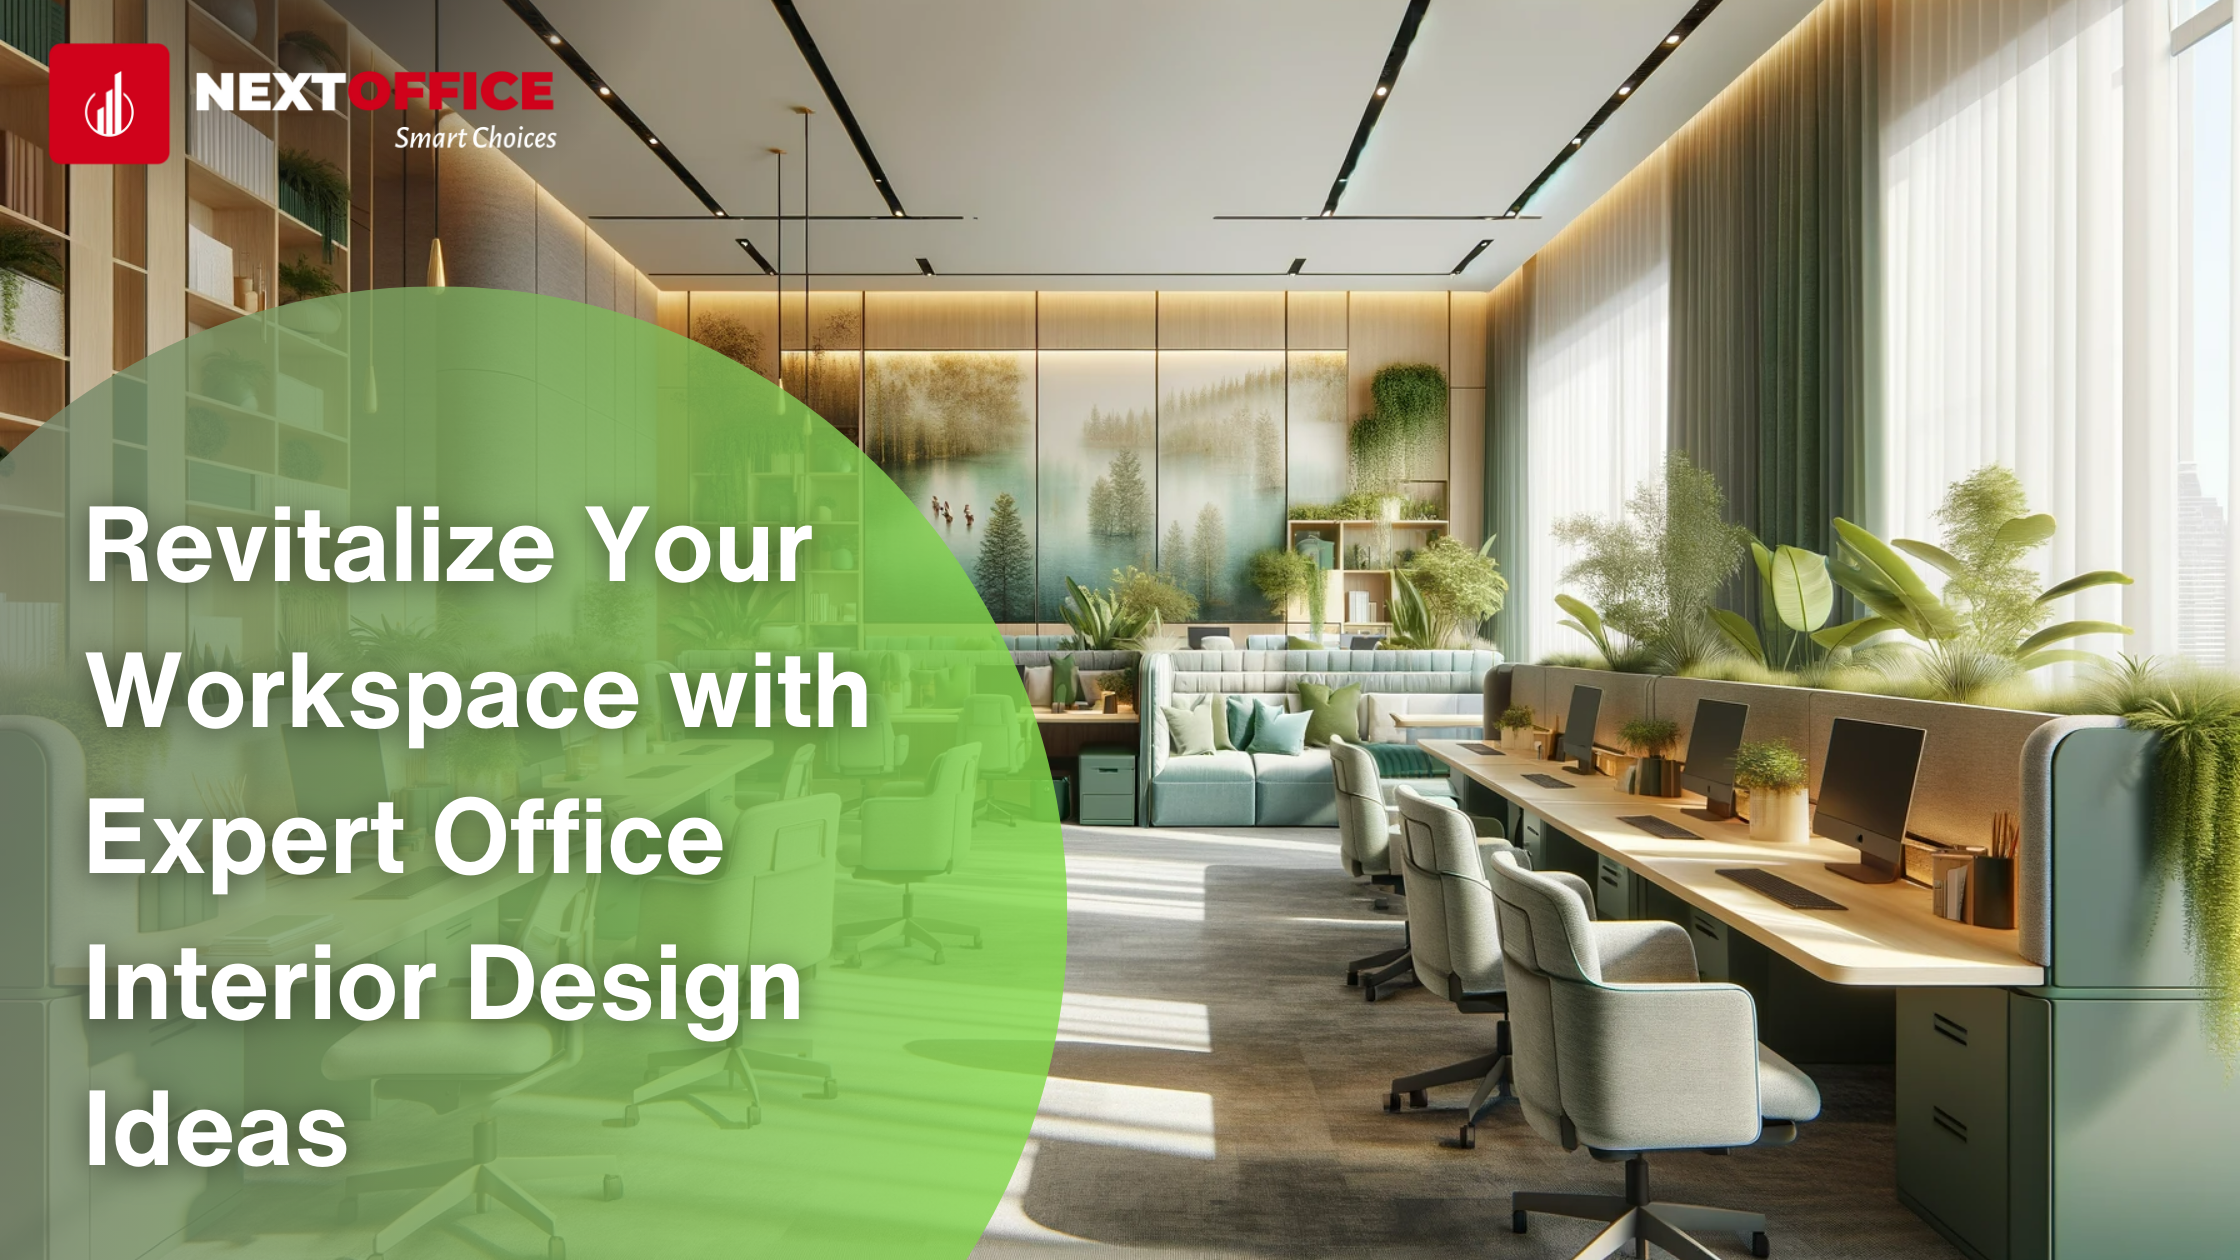 Revitalize Your Workspace with Expert Office Interior Design Ideas